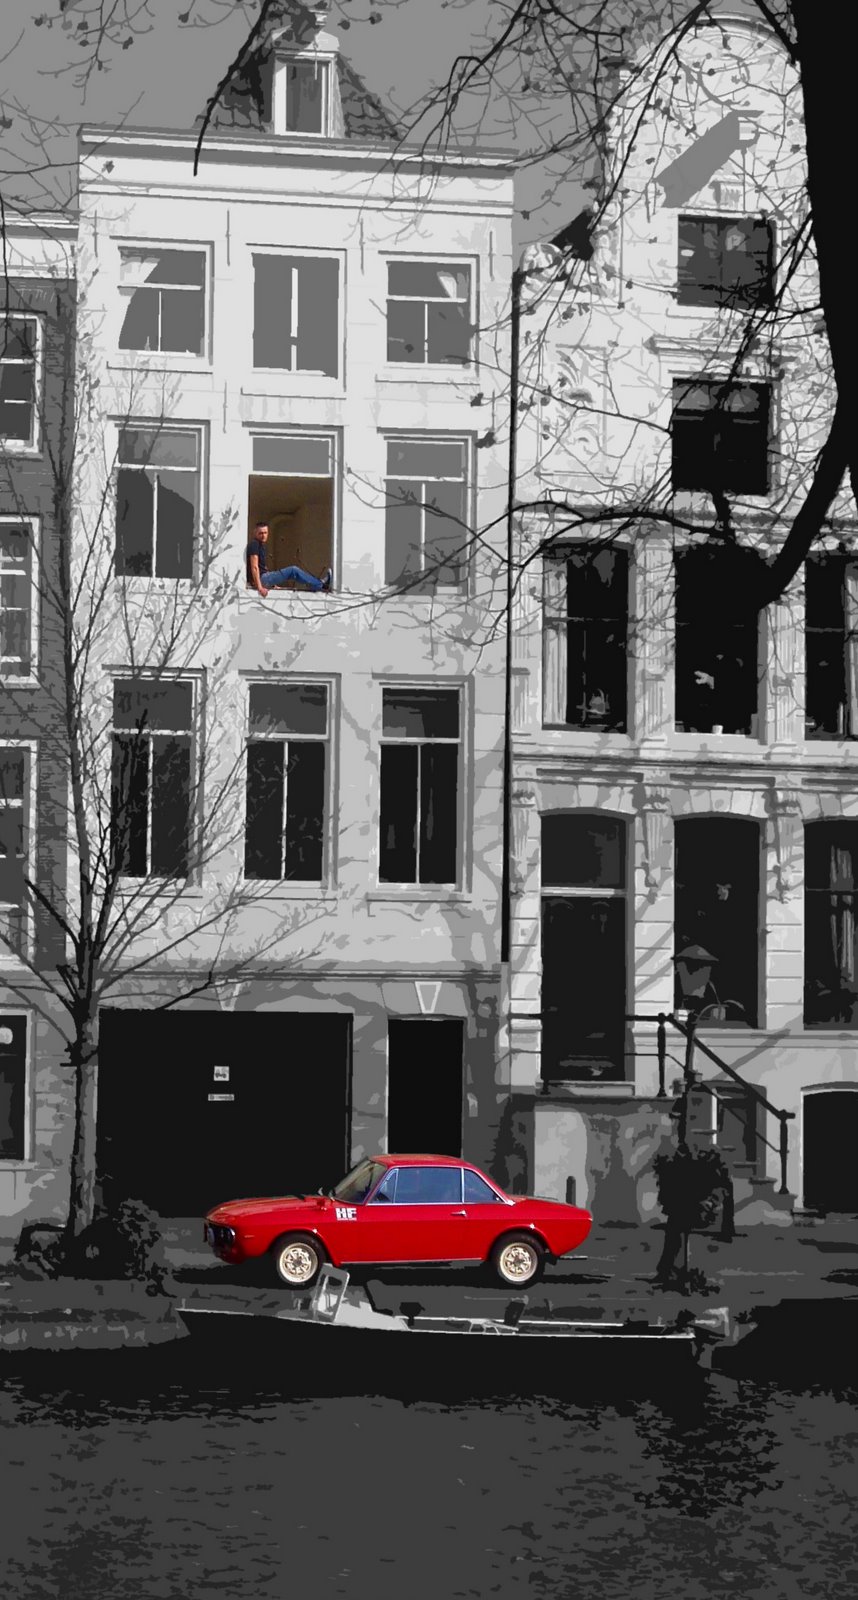 [amsterdam_red_car_and_man_in_the_window.jpg]